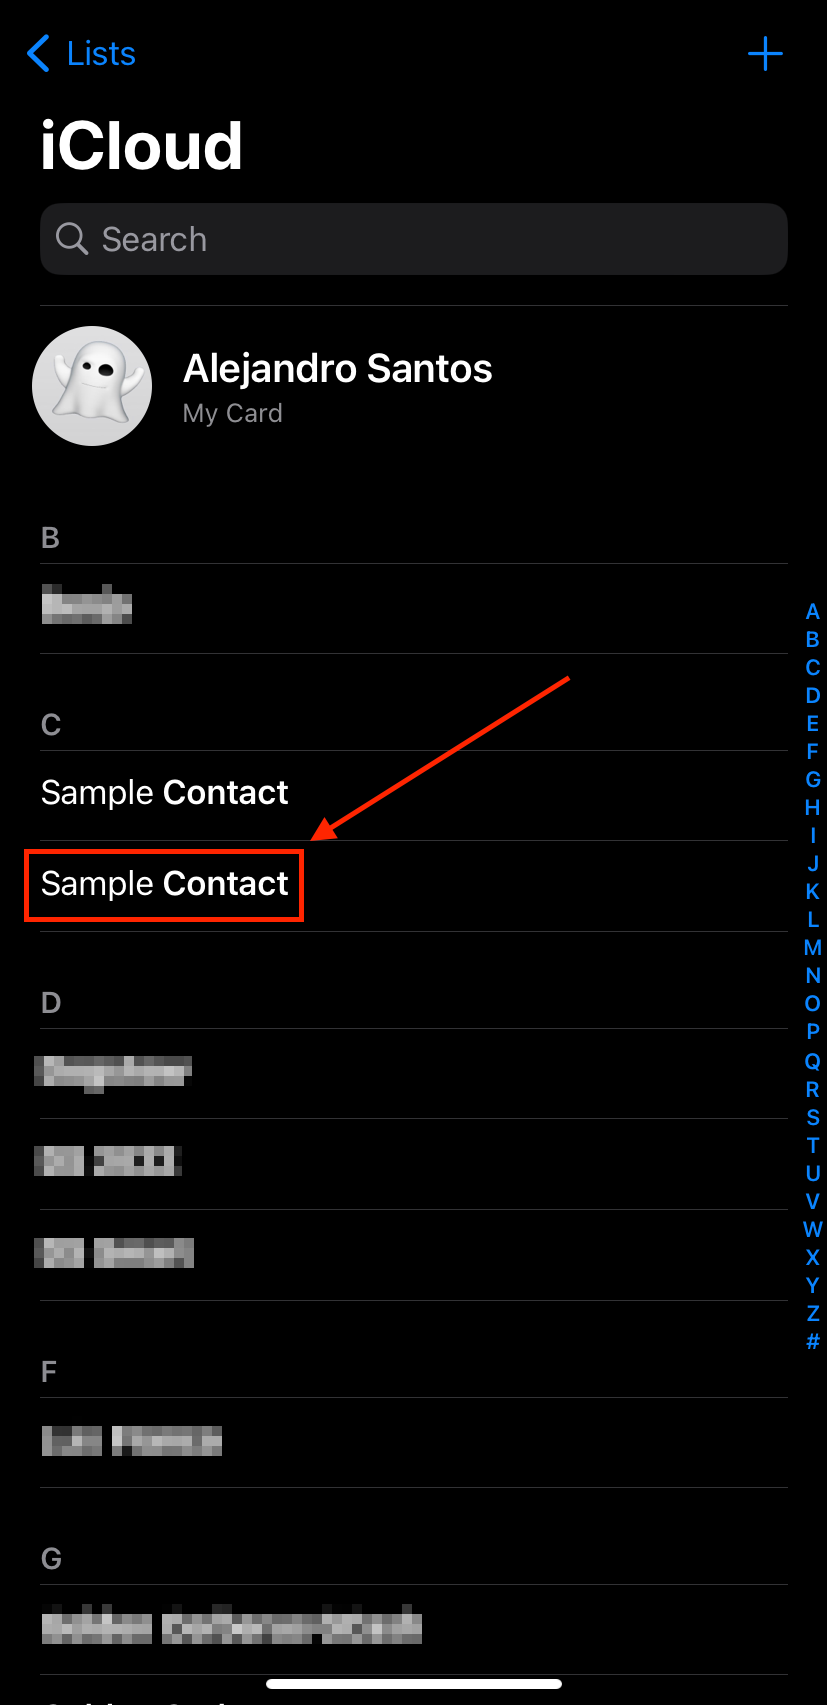 Duplicate contact in the iPhone's Contacts app